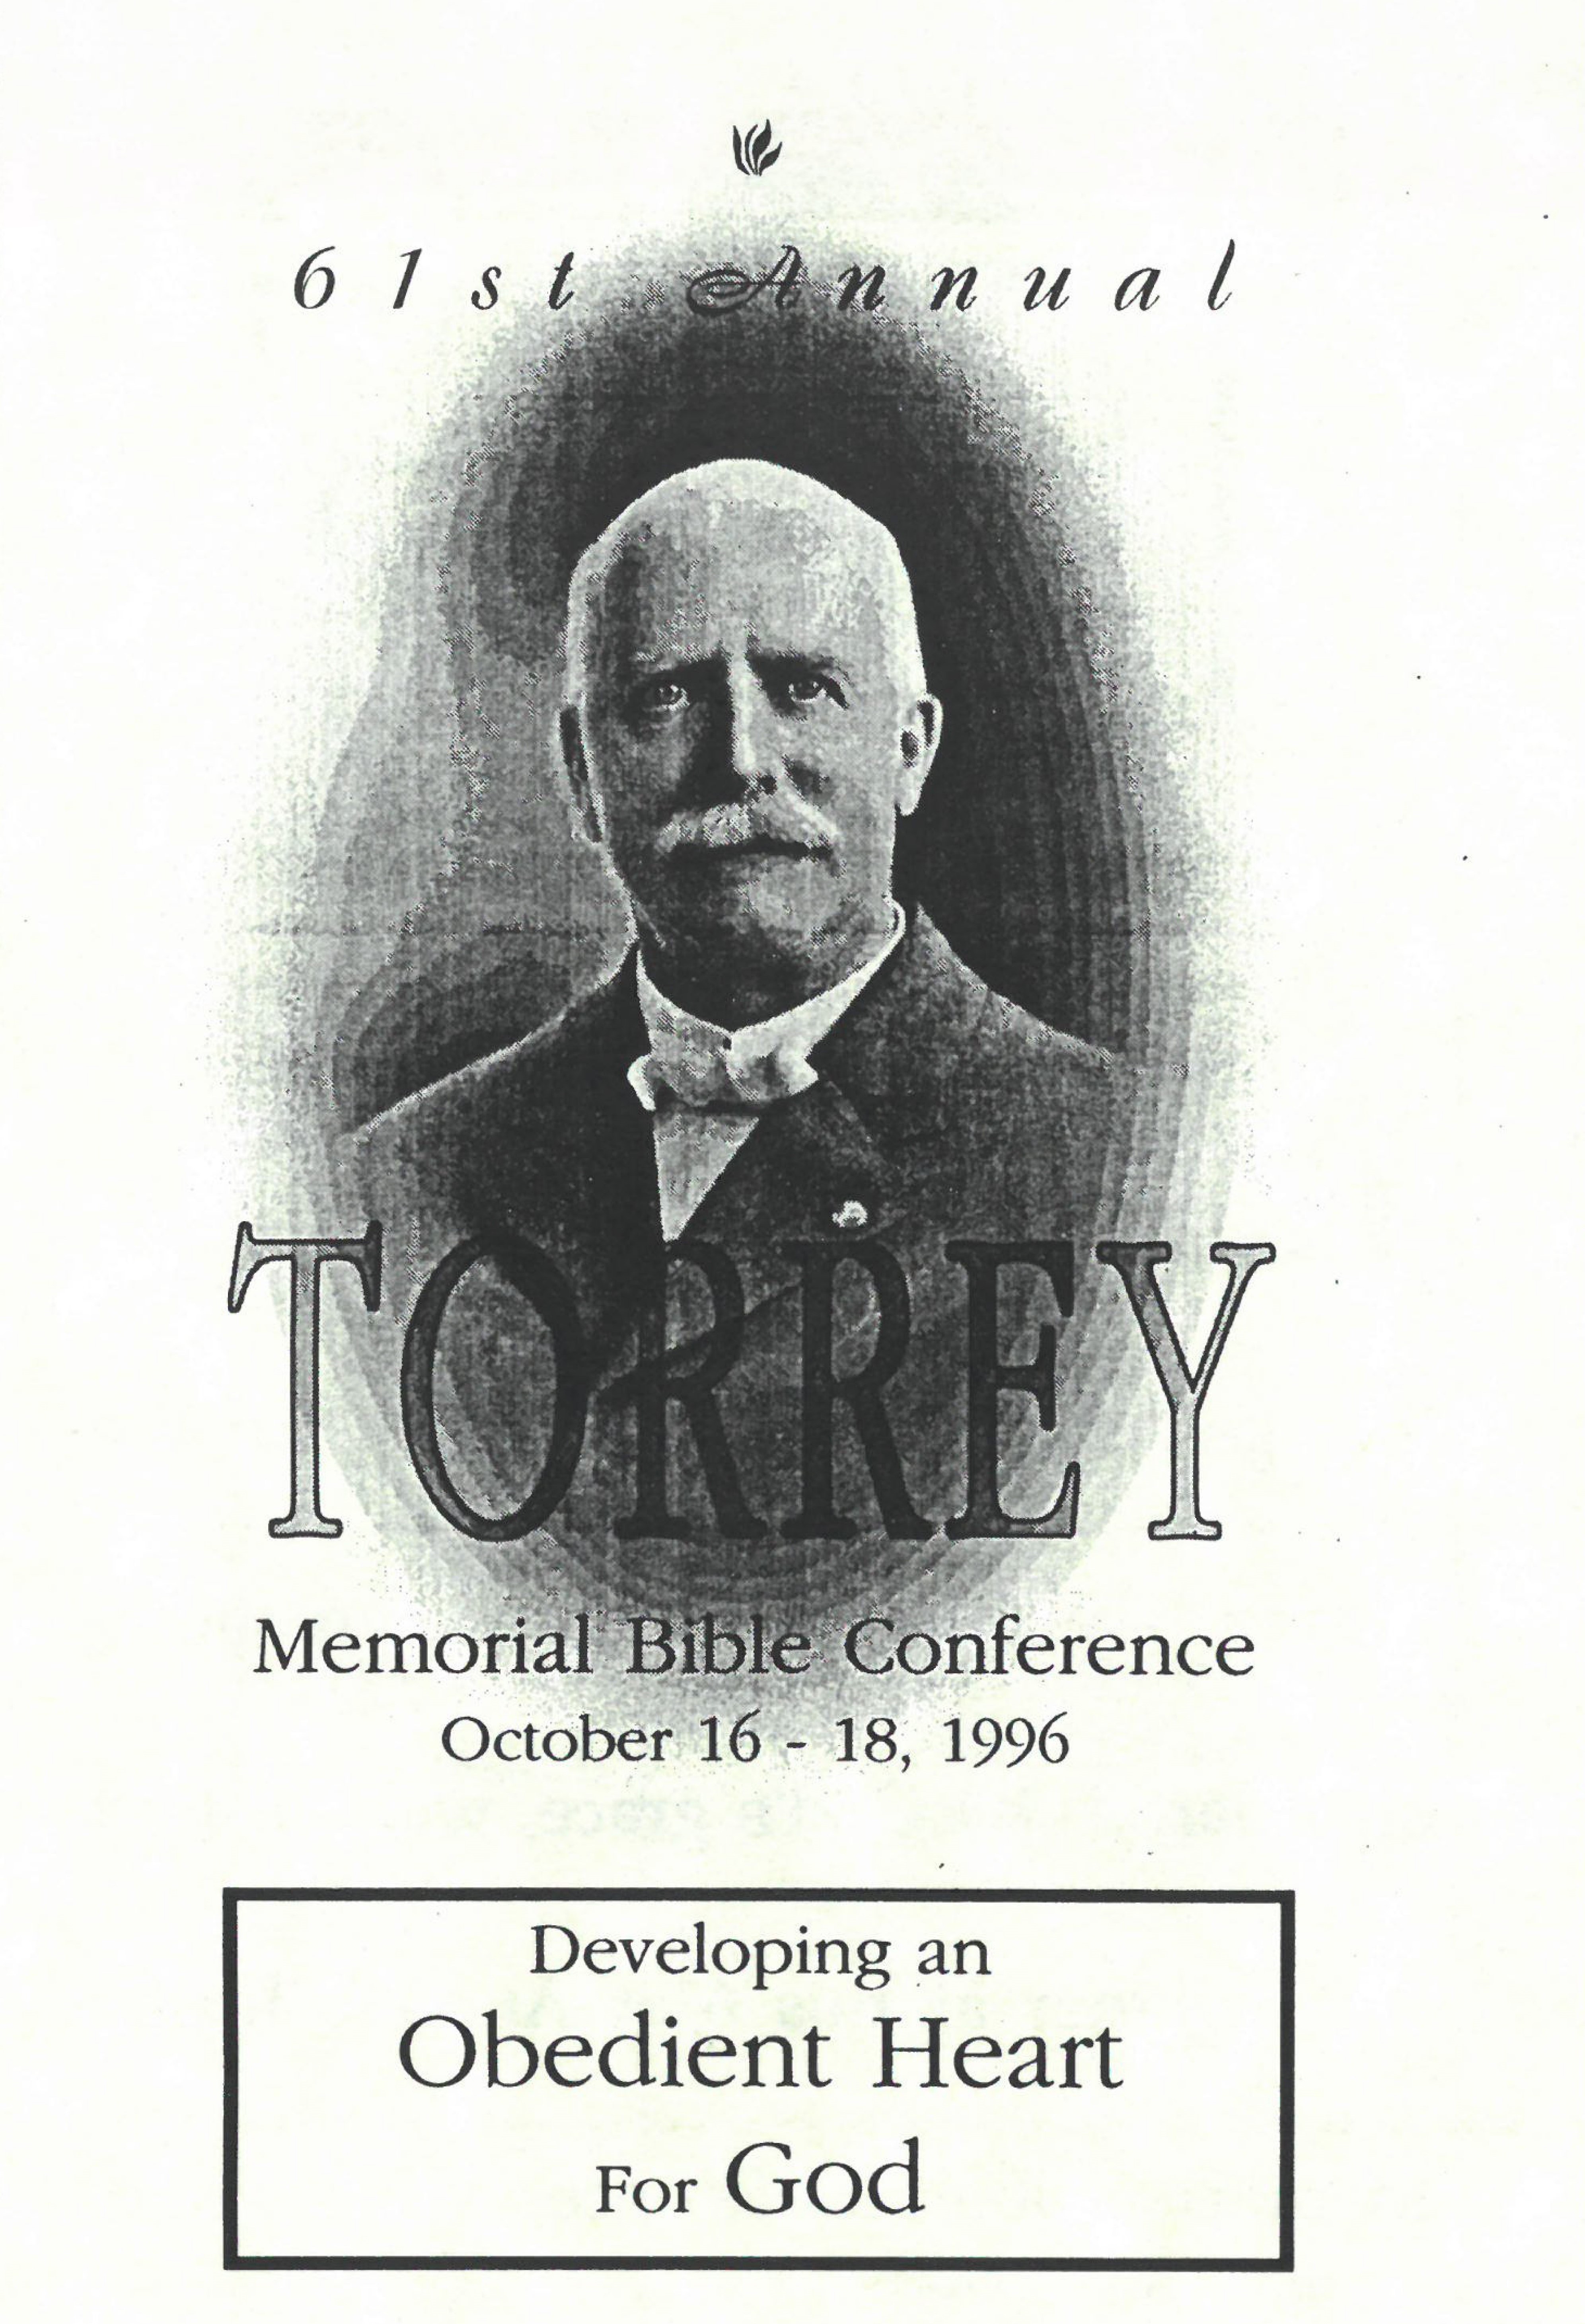 Torrey Memorial Bible Conference LXI: Developing an Obedient Heart for God